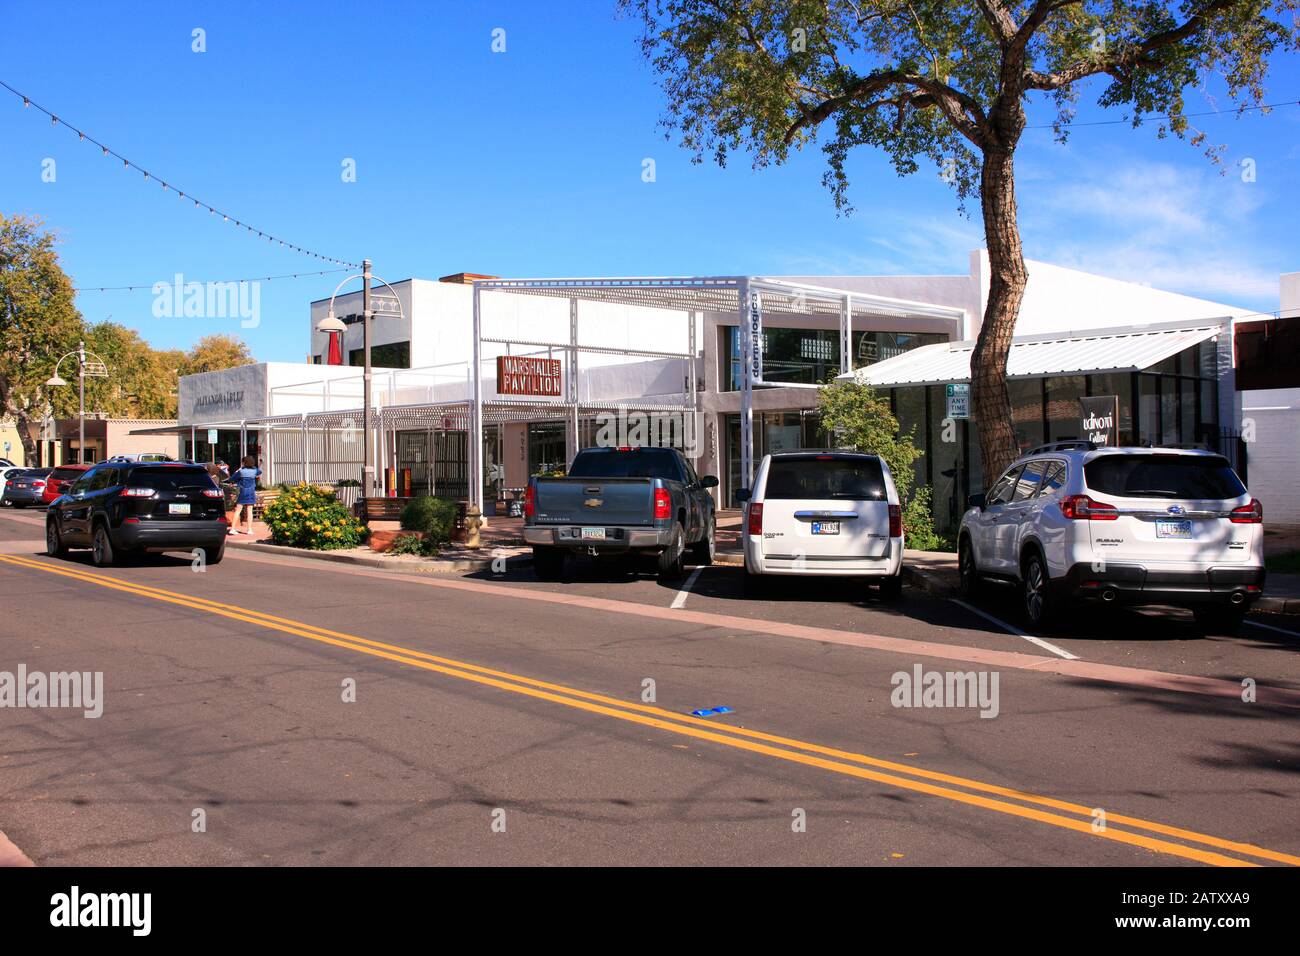 Marwshall Way Pavillion of stores in the Arts District of Old Town Scottsdale AZ Stock Photo